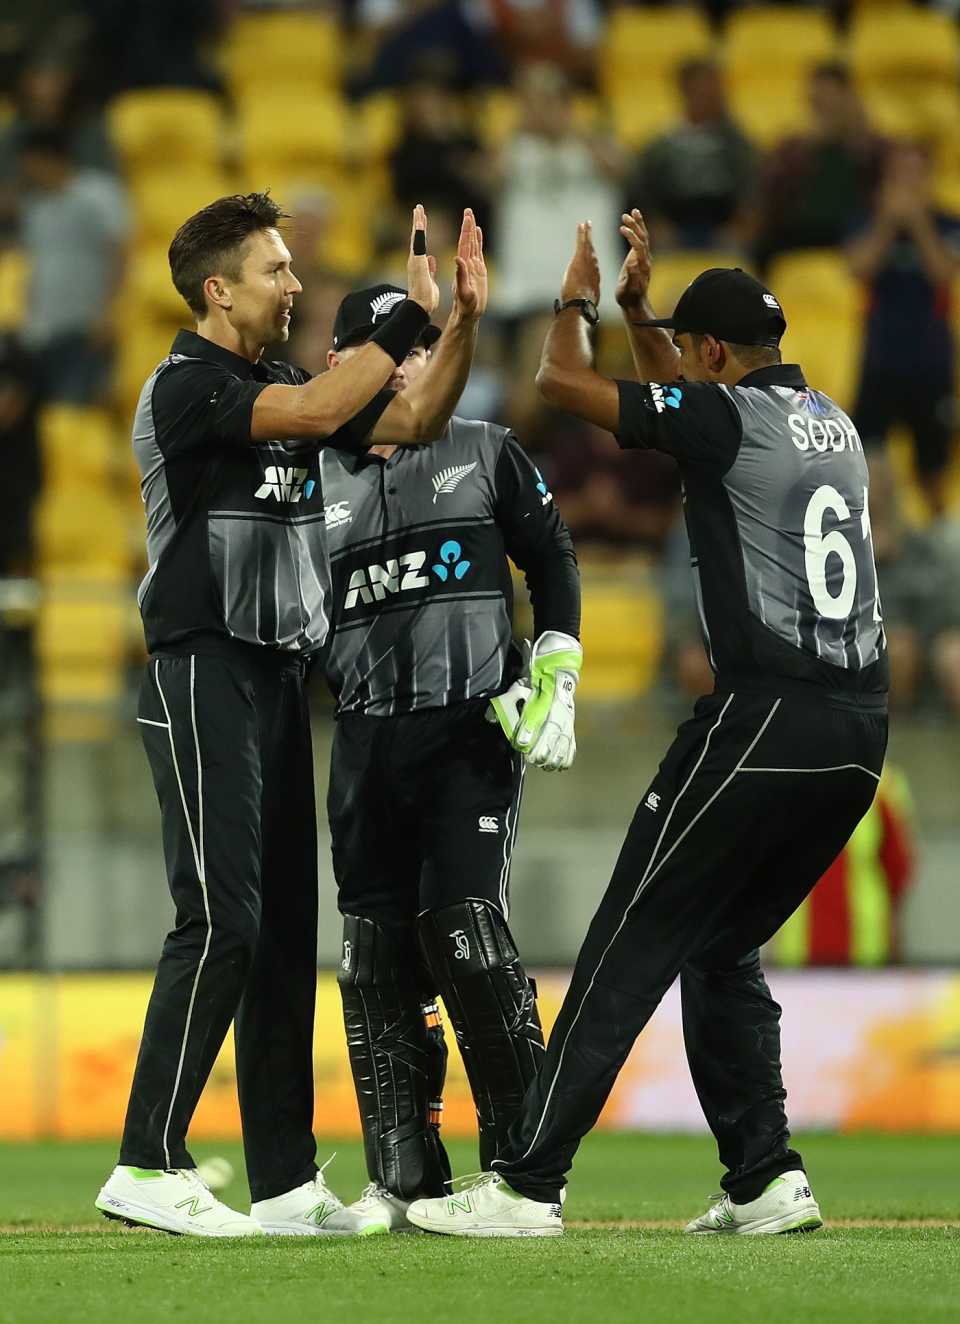 Trent Boult picked up two in two balls during the closing stages